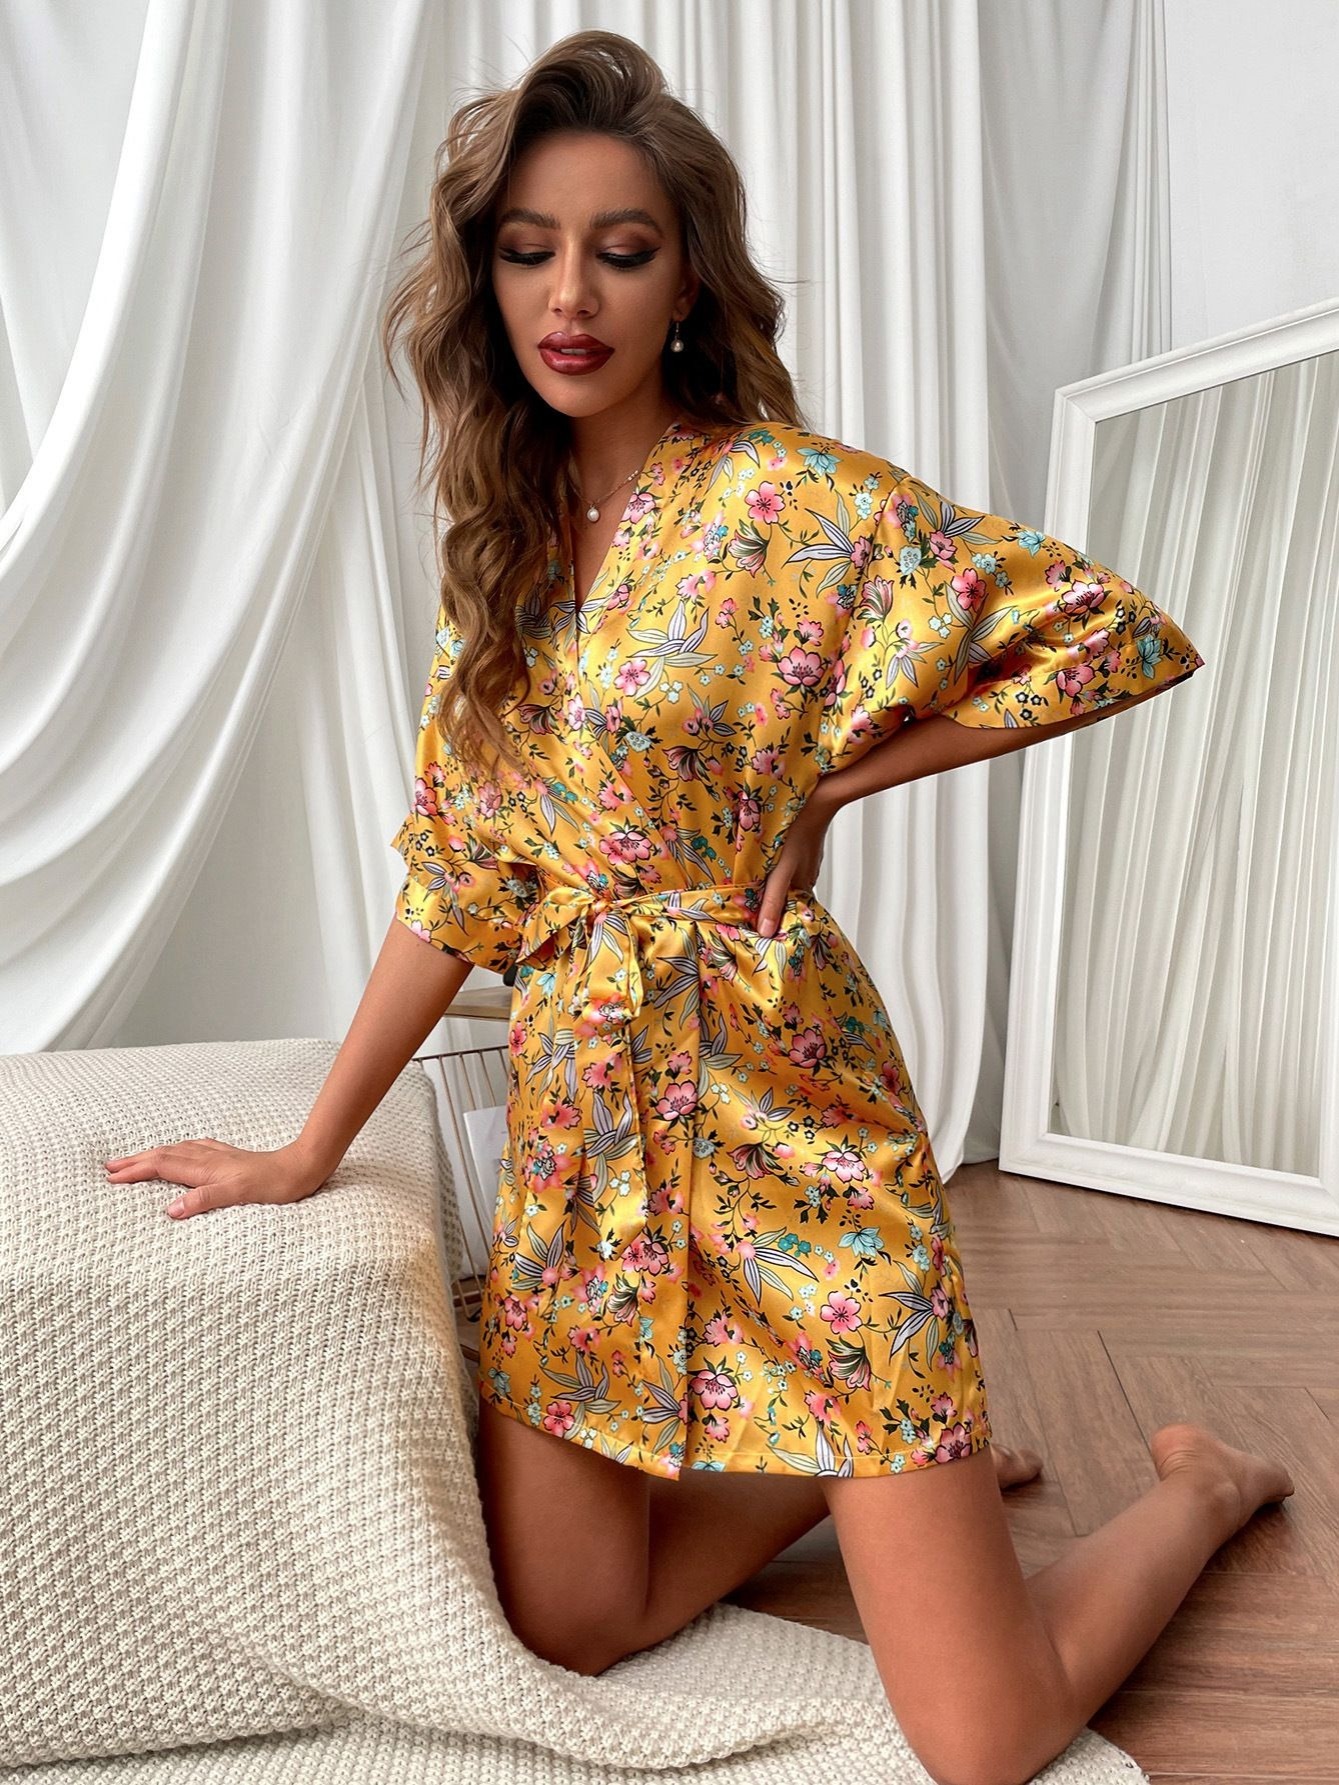 Women's Satin Floral Print Short Sleeve Belted Lounge Robes